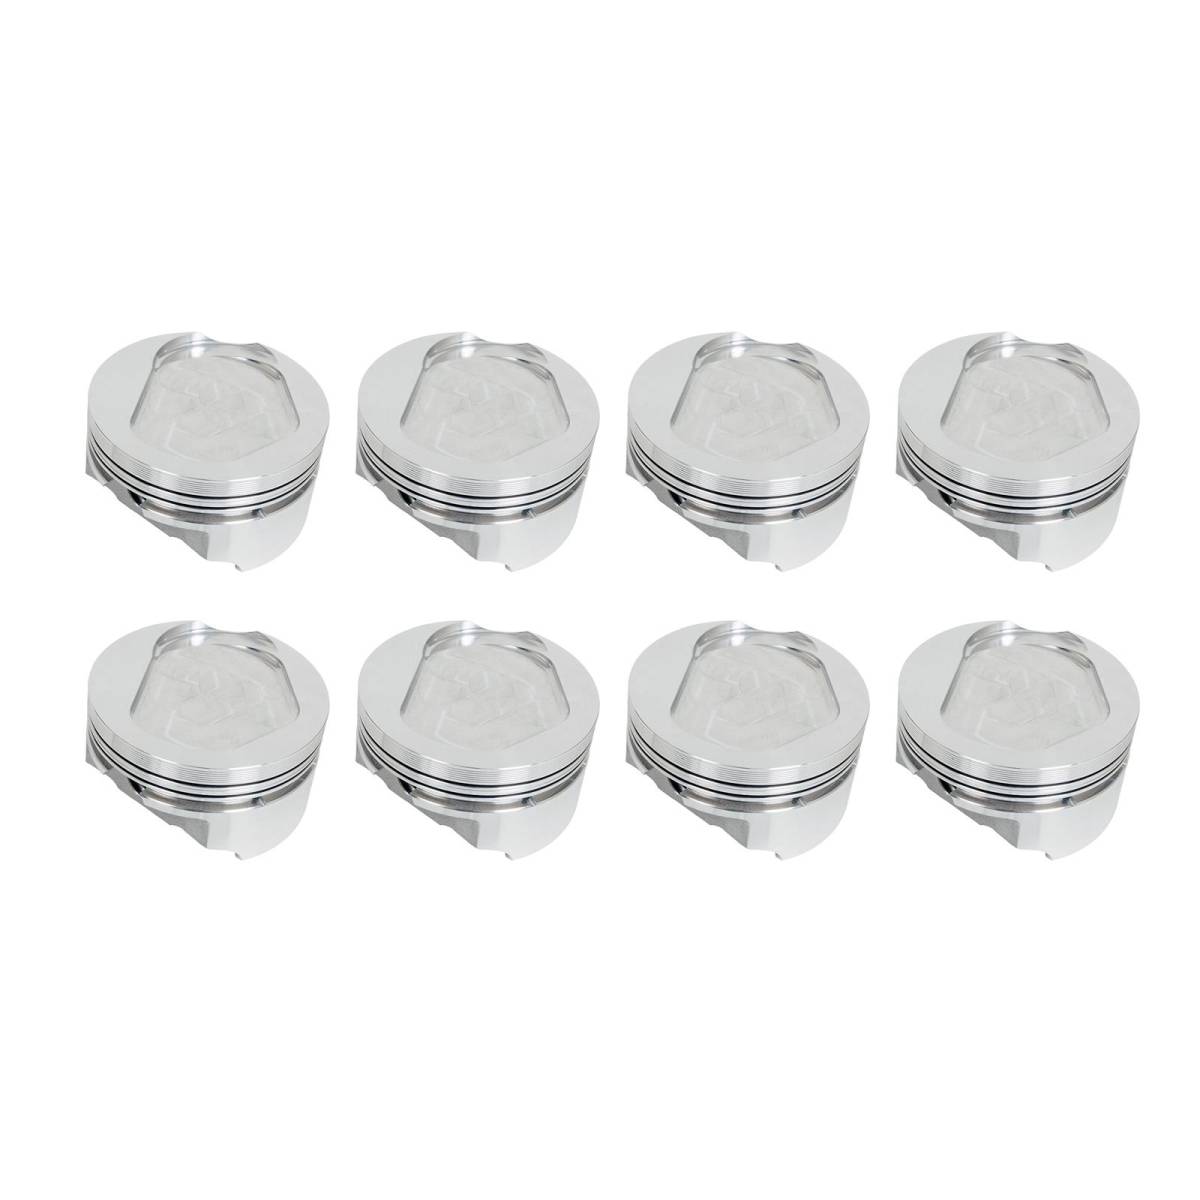 Trickflow - Trickflow Powerport Forged Pistons For Ford Clevor 351C 4.125" Bore - Set of 8 (Single Valve Relief) - Image 1